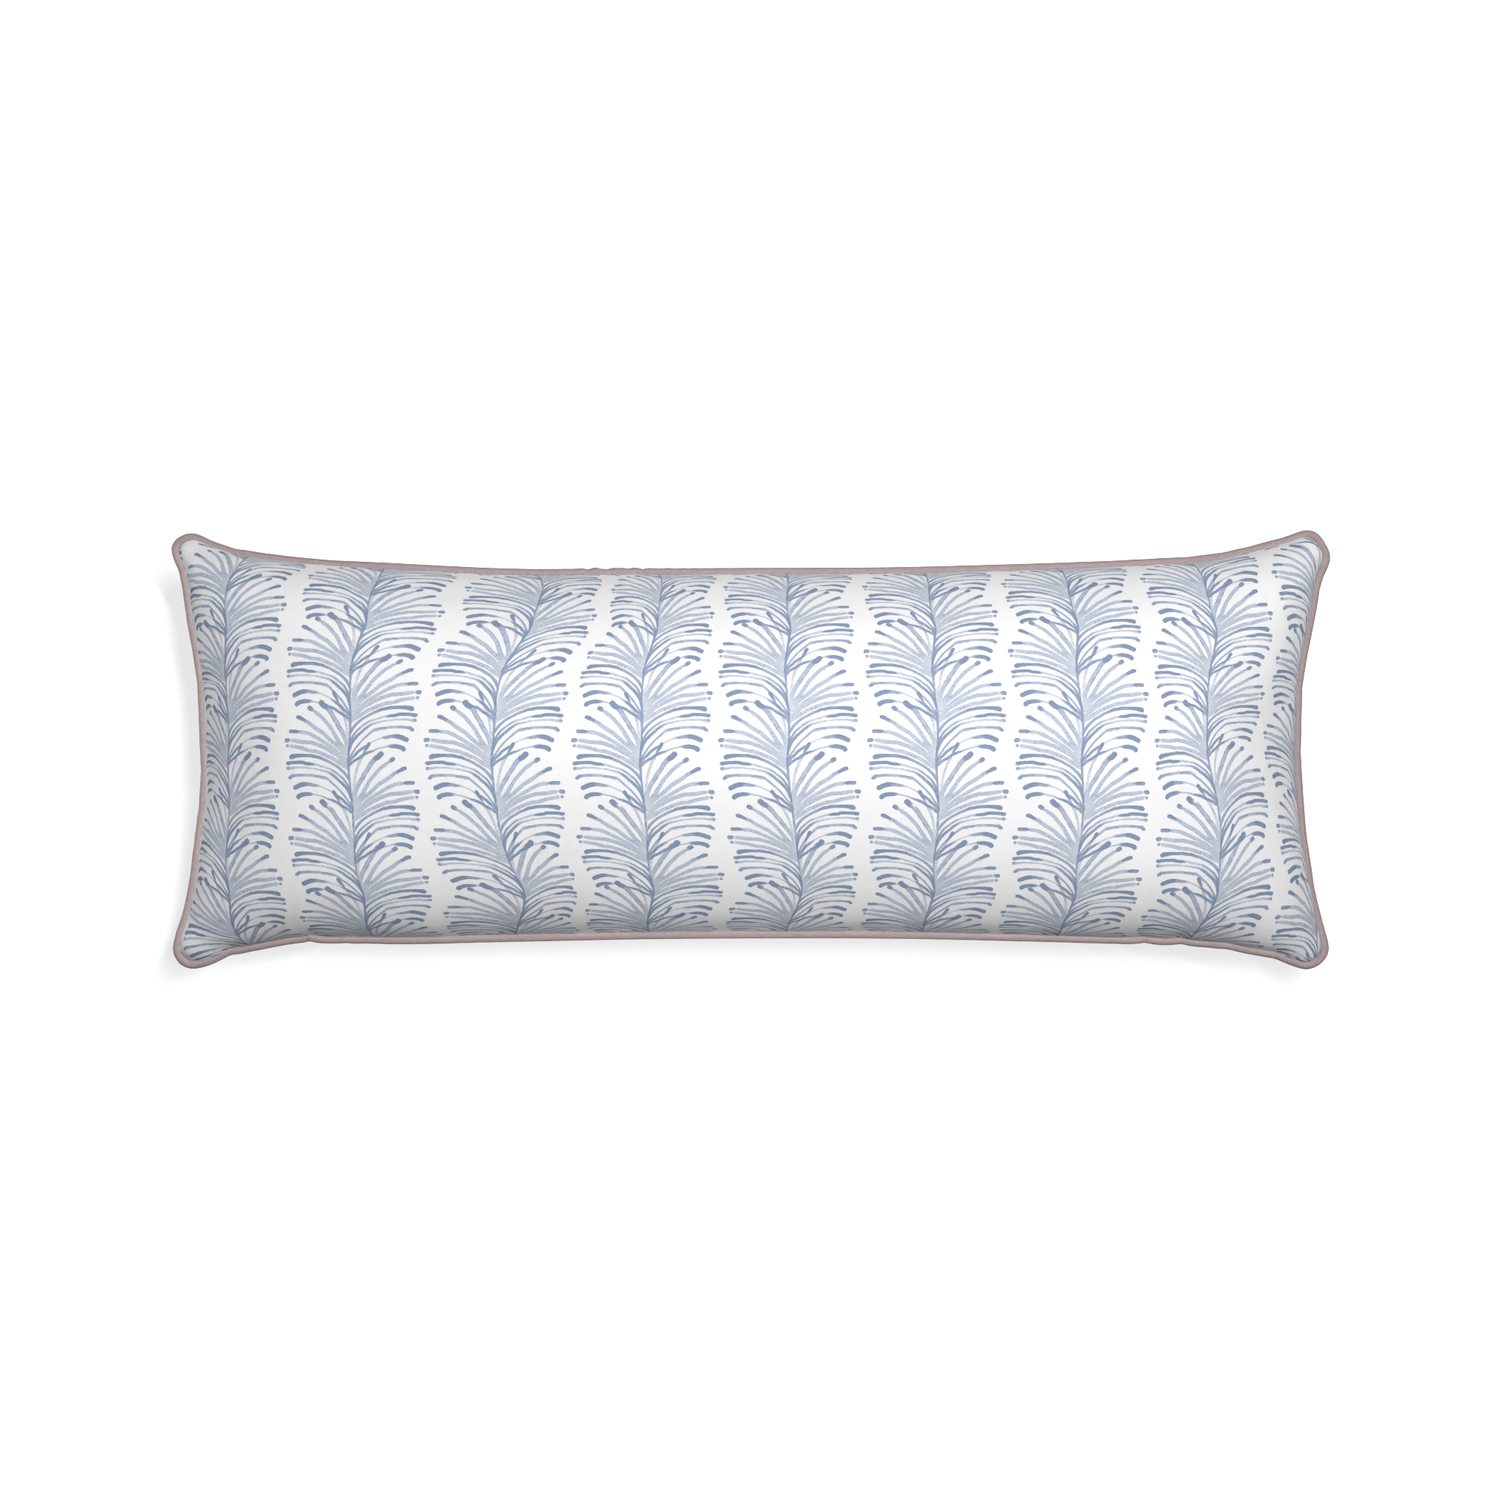 Xl-lumbar emma sky custom sky blue botanical stripepillow with orchid piping on white background